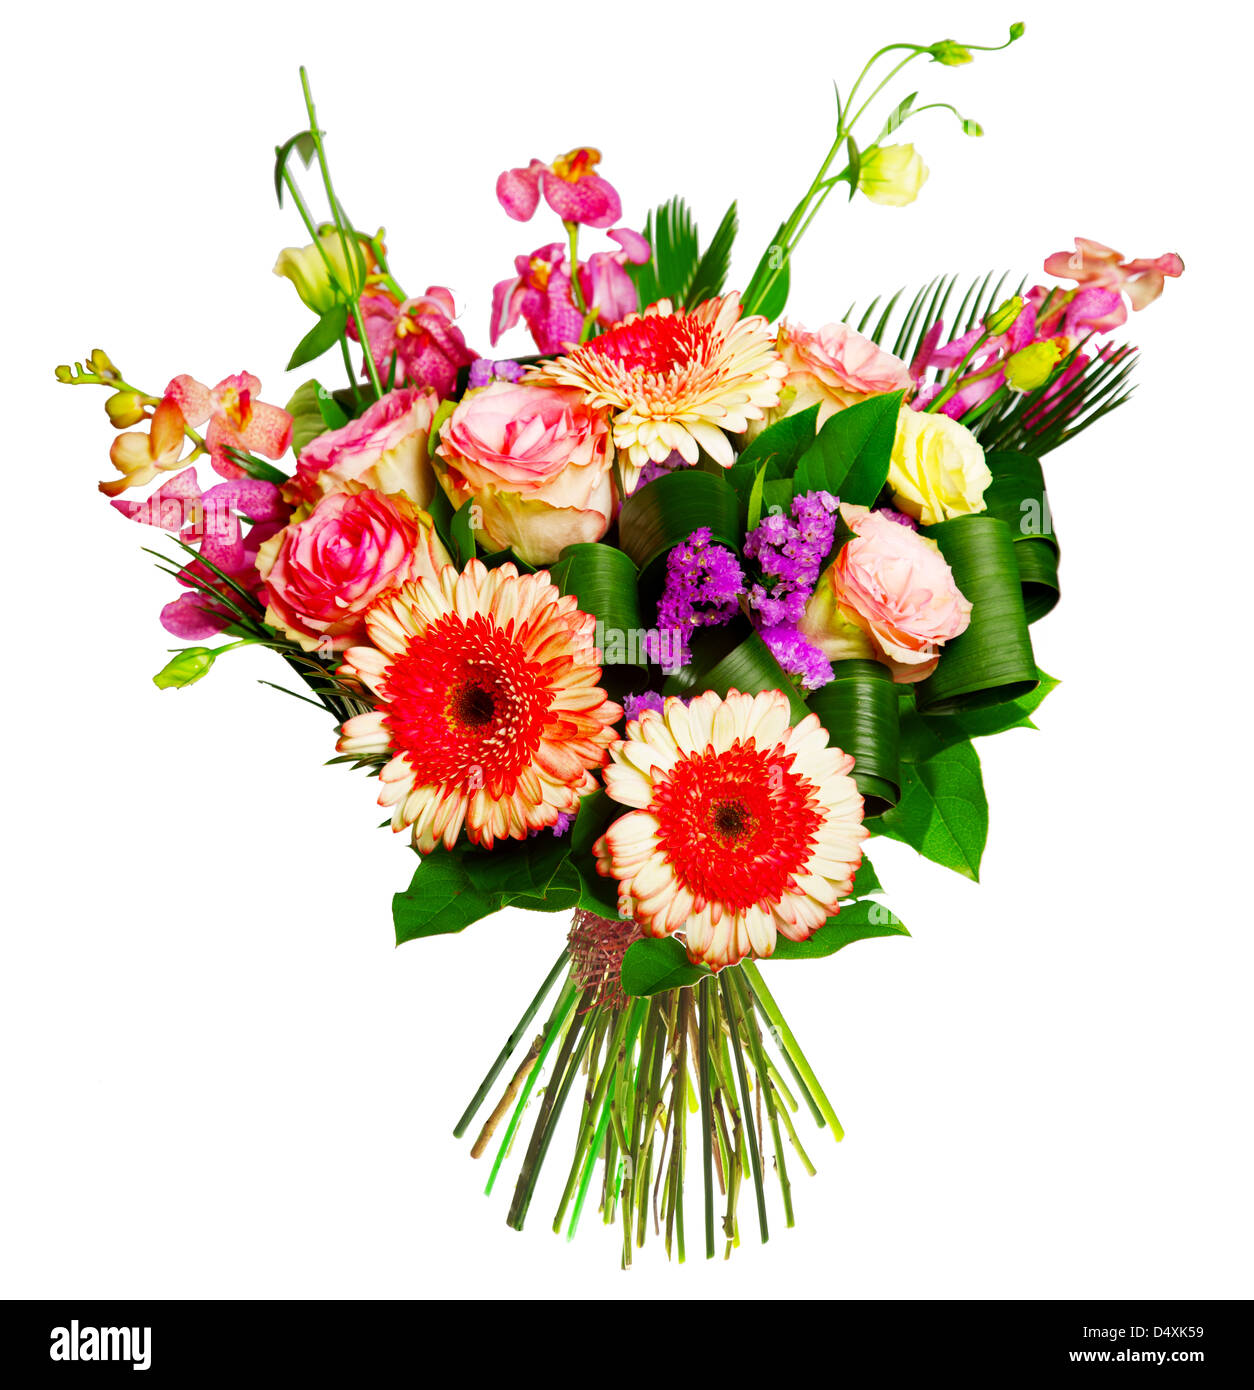 bouquet of roses, gerberas and alsrtomerias isolated over white background Stock Photo